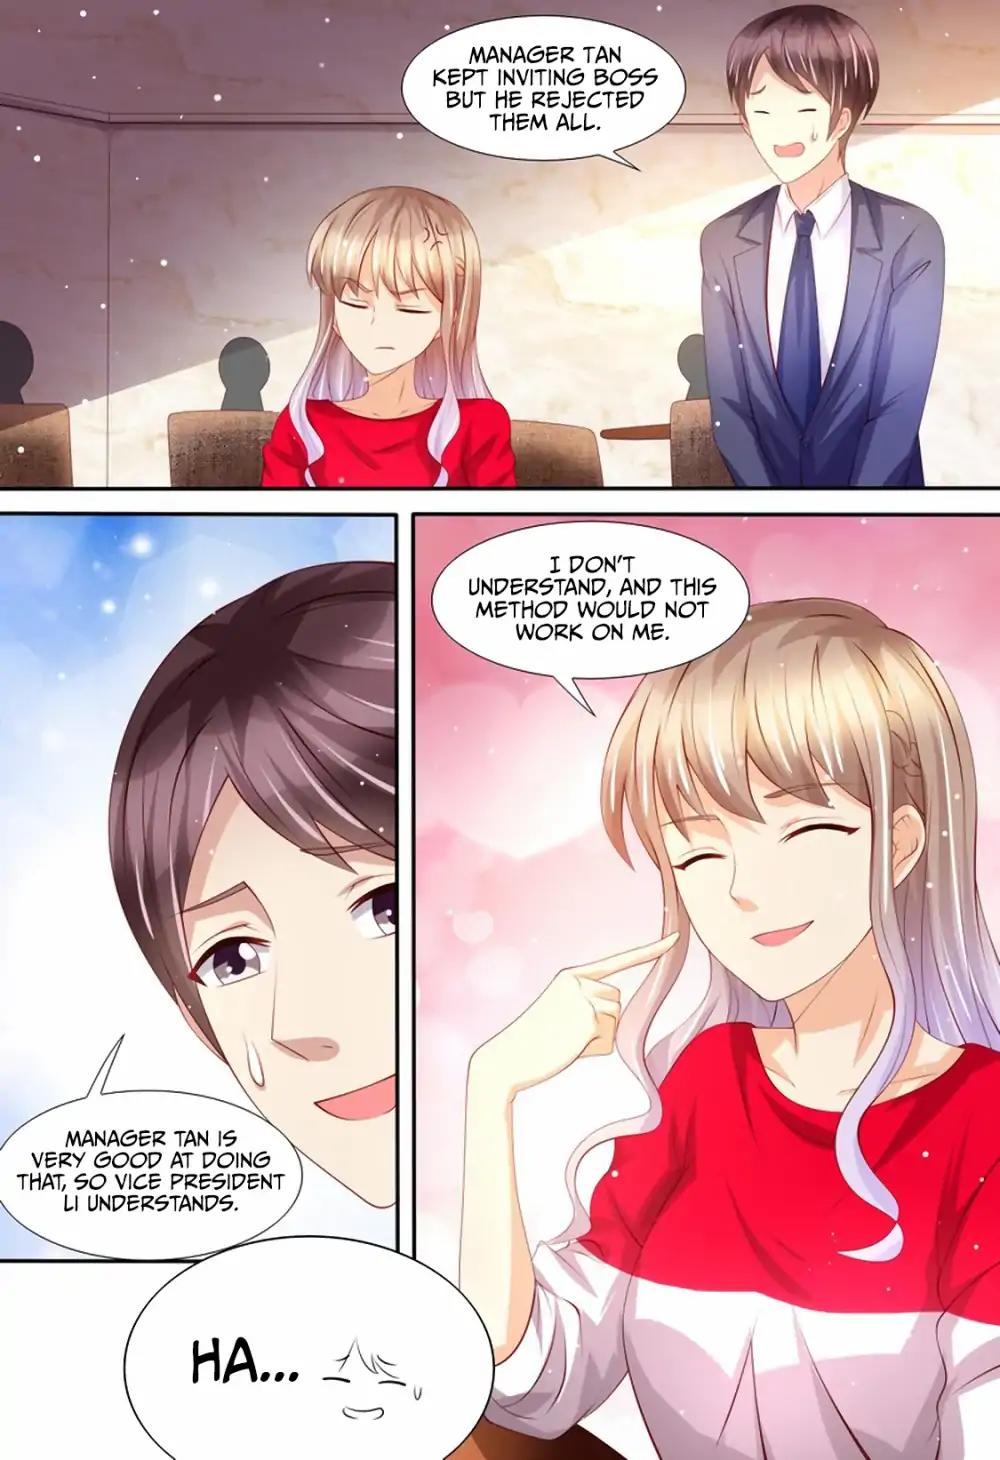 An Exorbitant Wife Chapter 144: